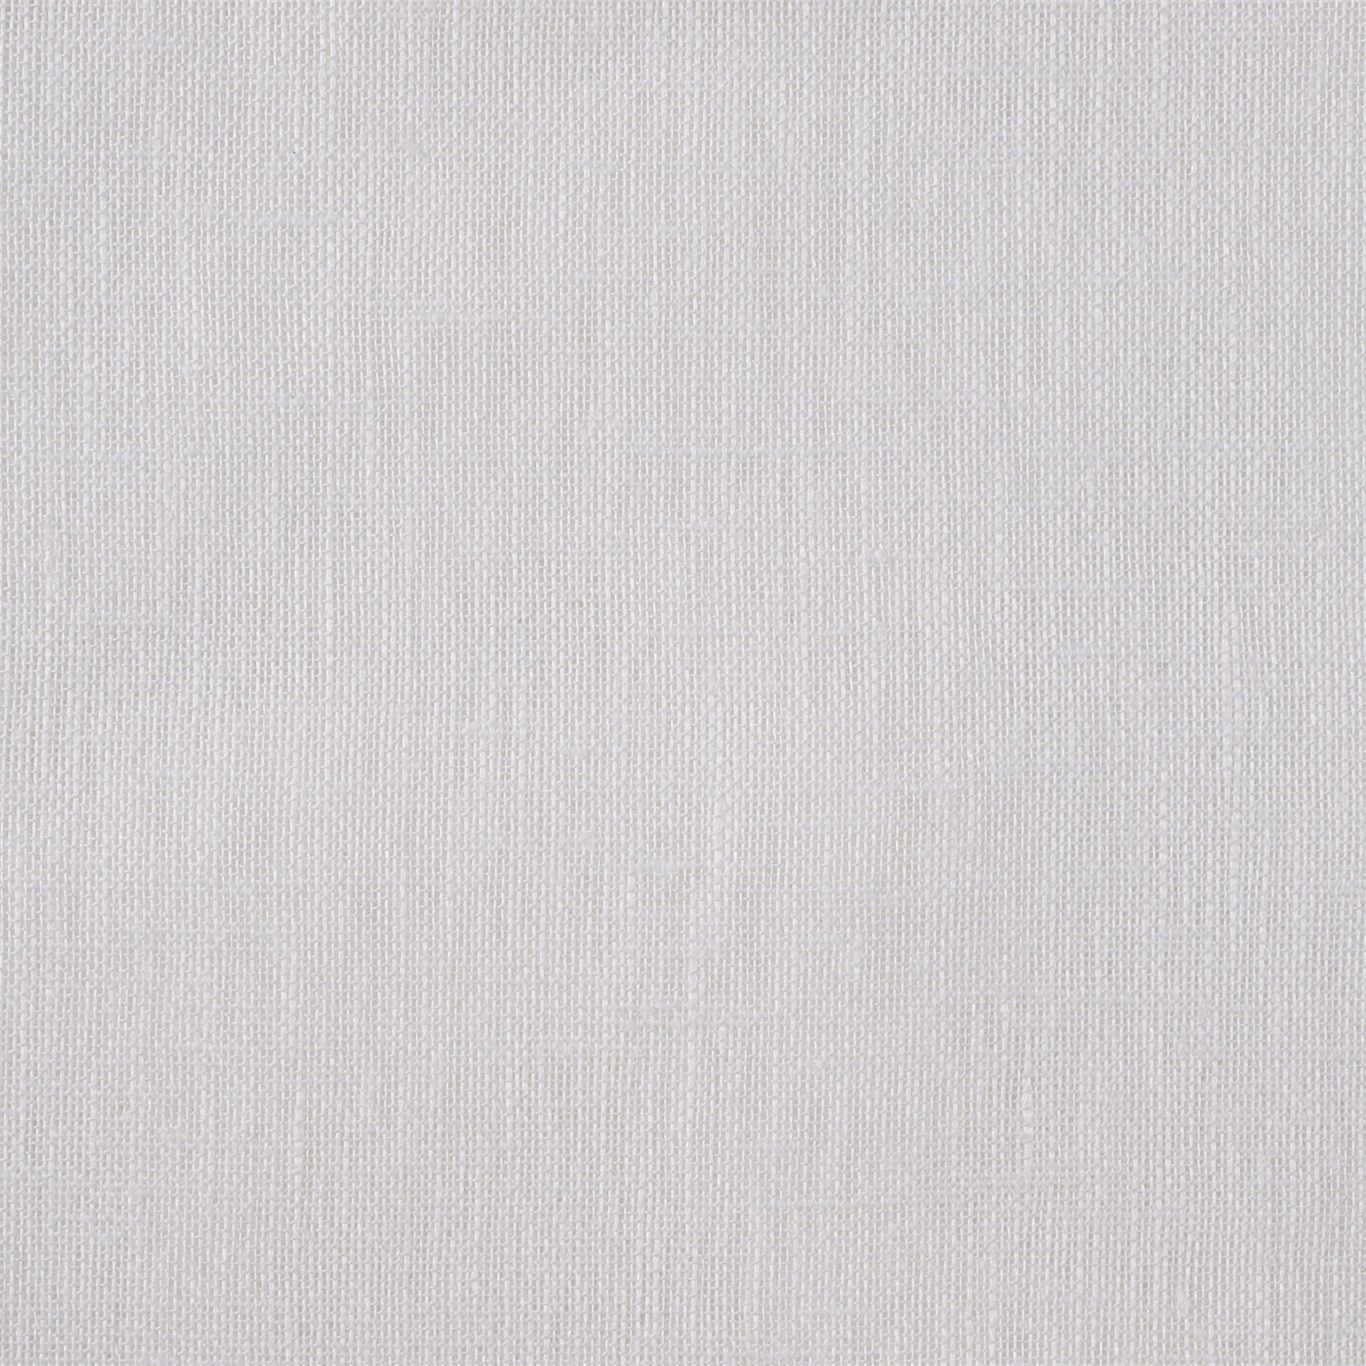 Purity Voiles Snow Fabric by HAR